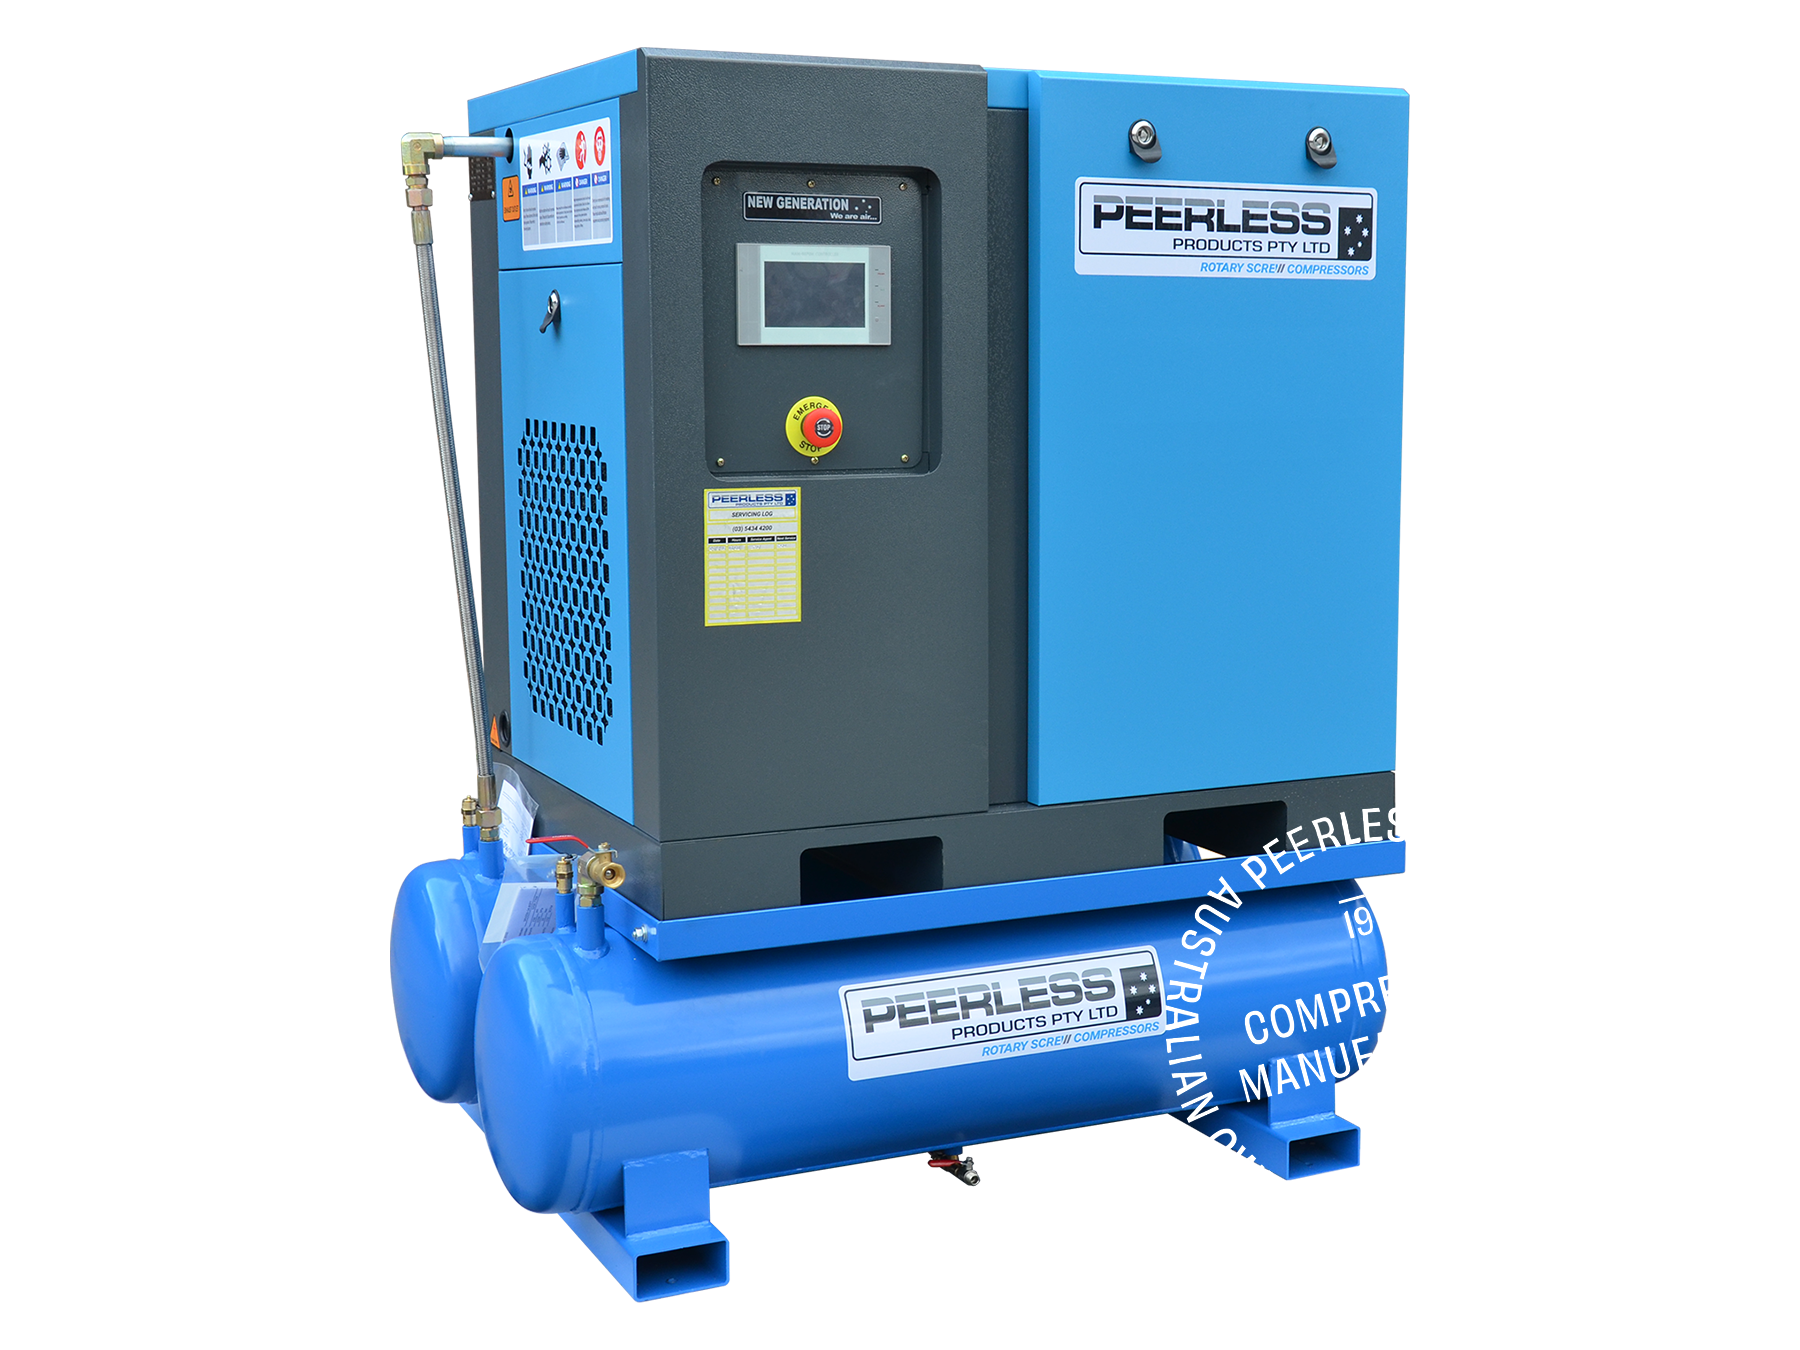 HQD10 Rotary Screw Air Compressor with Variable Speed: Direct Drive, 10HP, 1000LPM at 8Bar - Fixed Pressure